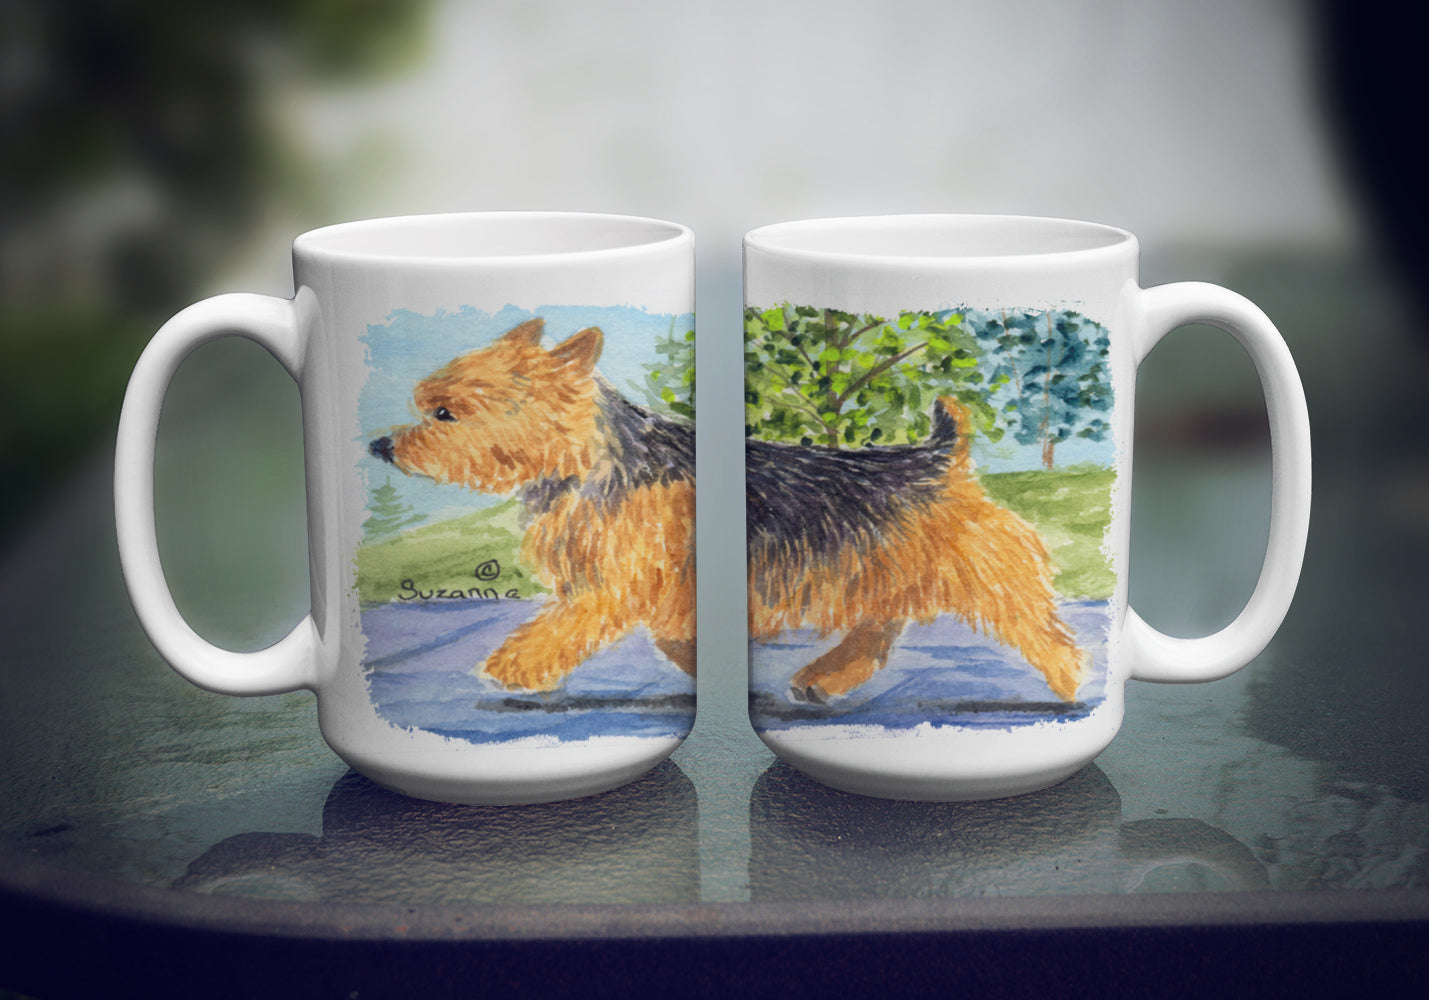 Norwich Terrier Dishwasher Safe Microwavable Ceramic Coffee Mug 15 ounce SS8879CM15